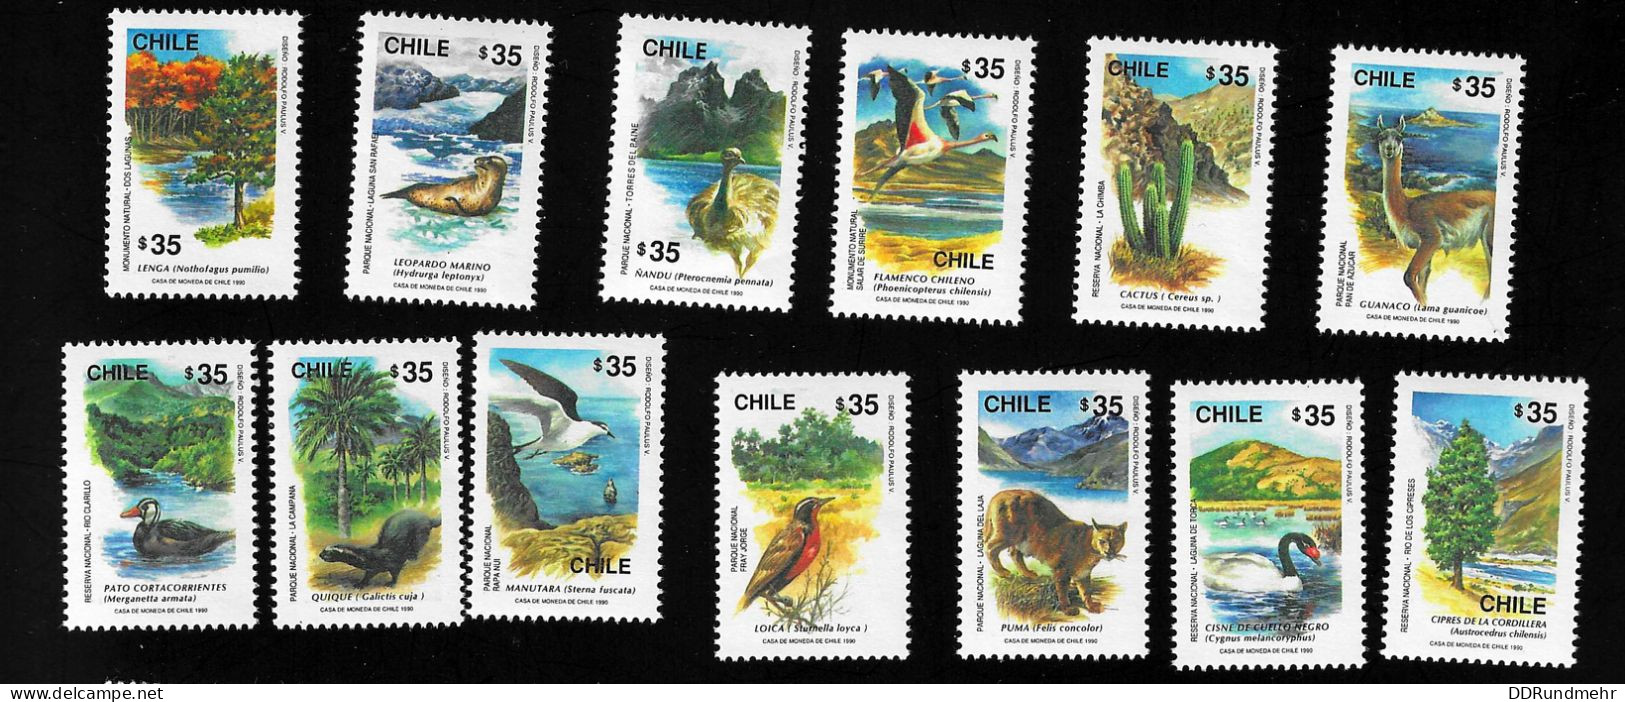 Lot Nationalparks Look For Scan Xx MNH - Chile